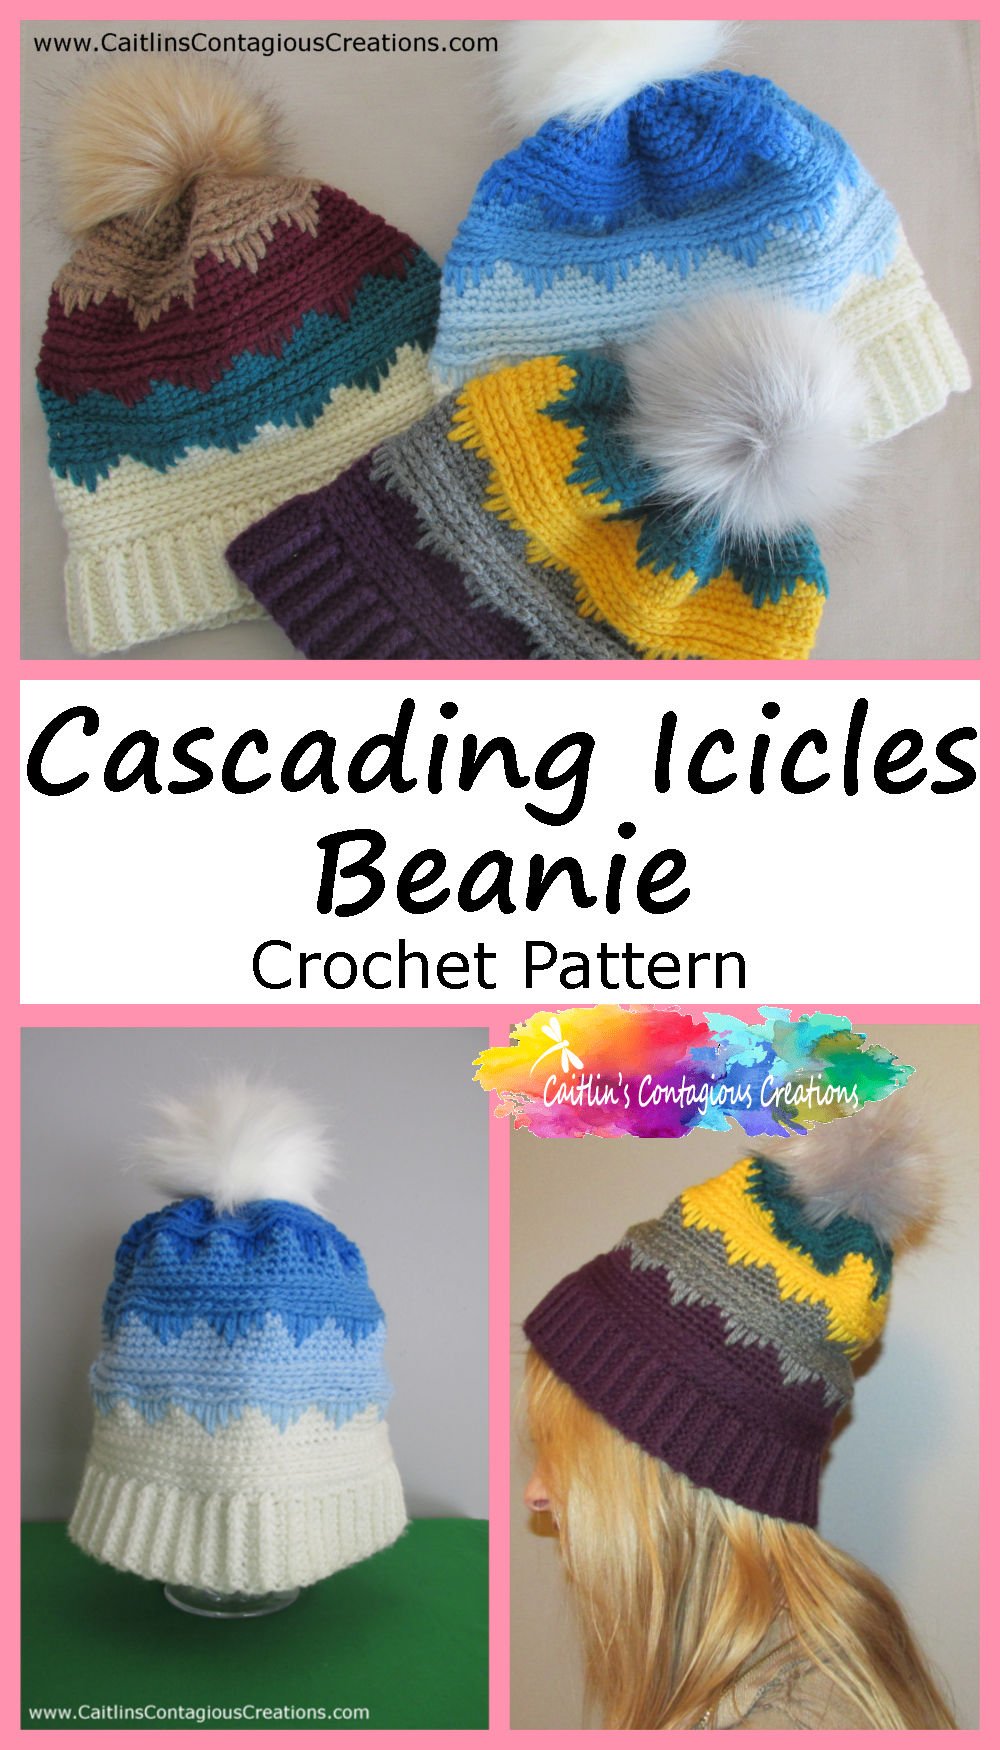 The Cascading Icicles Beanie Crochet Pattern is a free and easy crochet design written in 3 adult sizes by Caitlin's Contagious Creations. Written directions and step by step photos help you make either a winter cap or a messy bun ponytail hat! Grab you hook and start yours now.